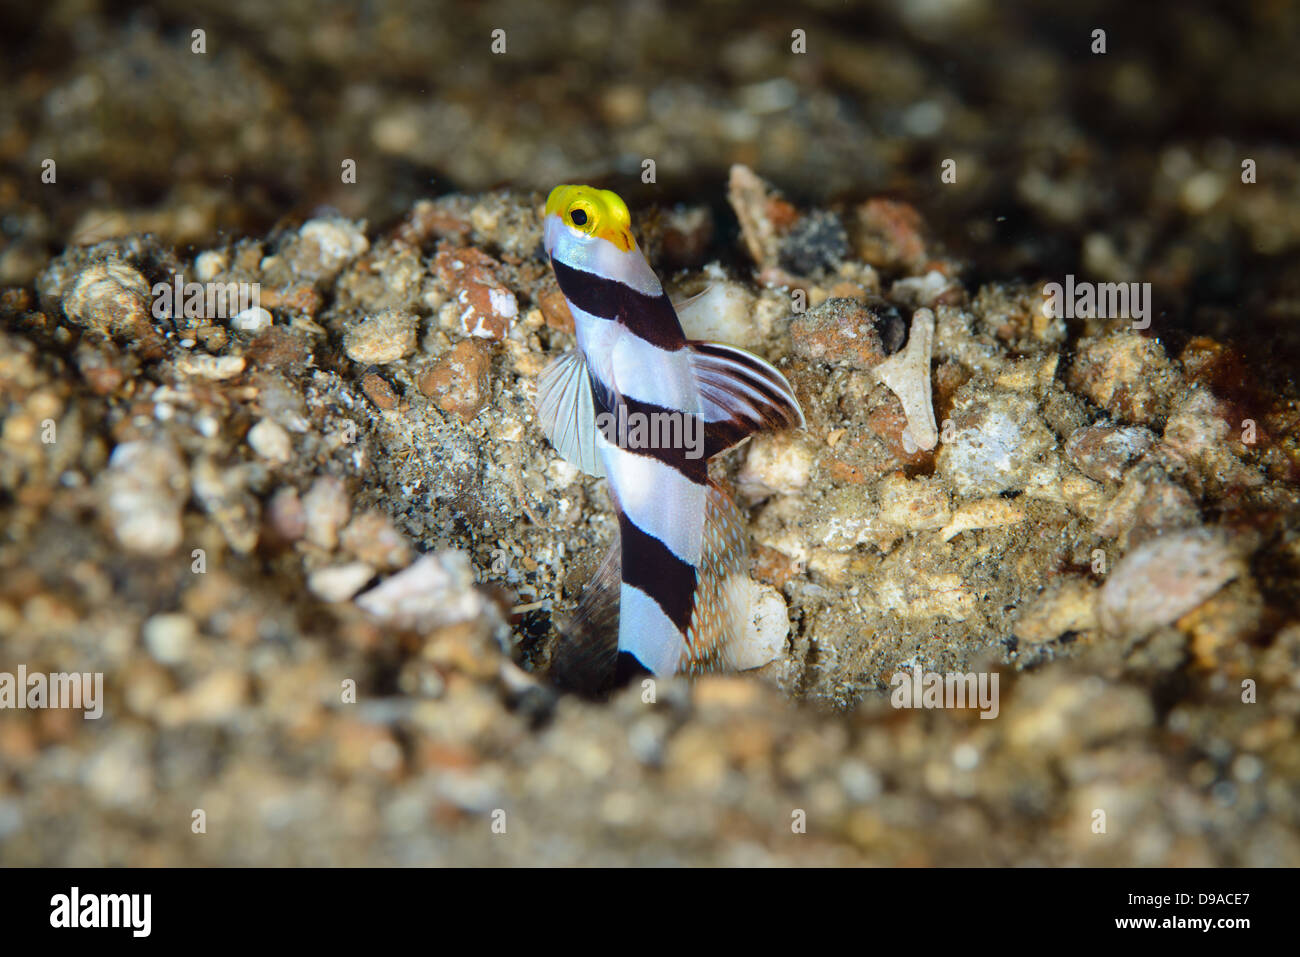 A yellow nose shrimp goby (Stonogobiops xanthorhinica) takes a pick from its burrow. Lembeh Strait, Indonesia. Stock Photo